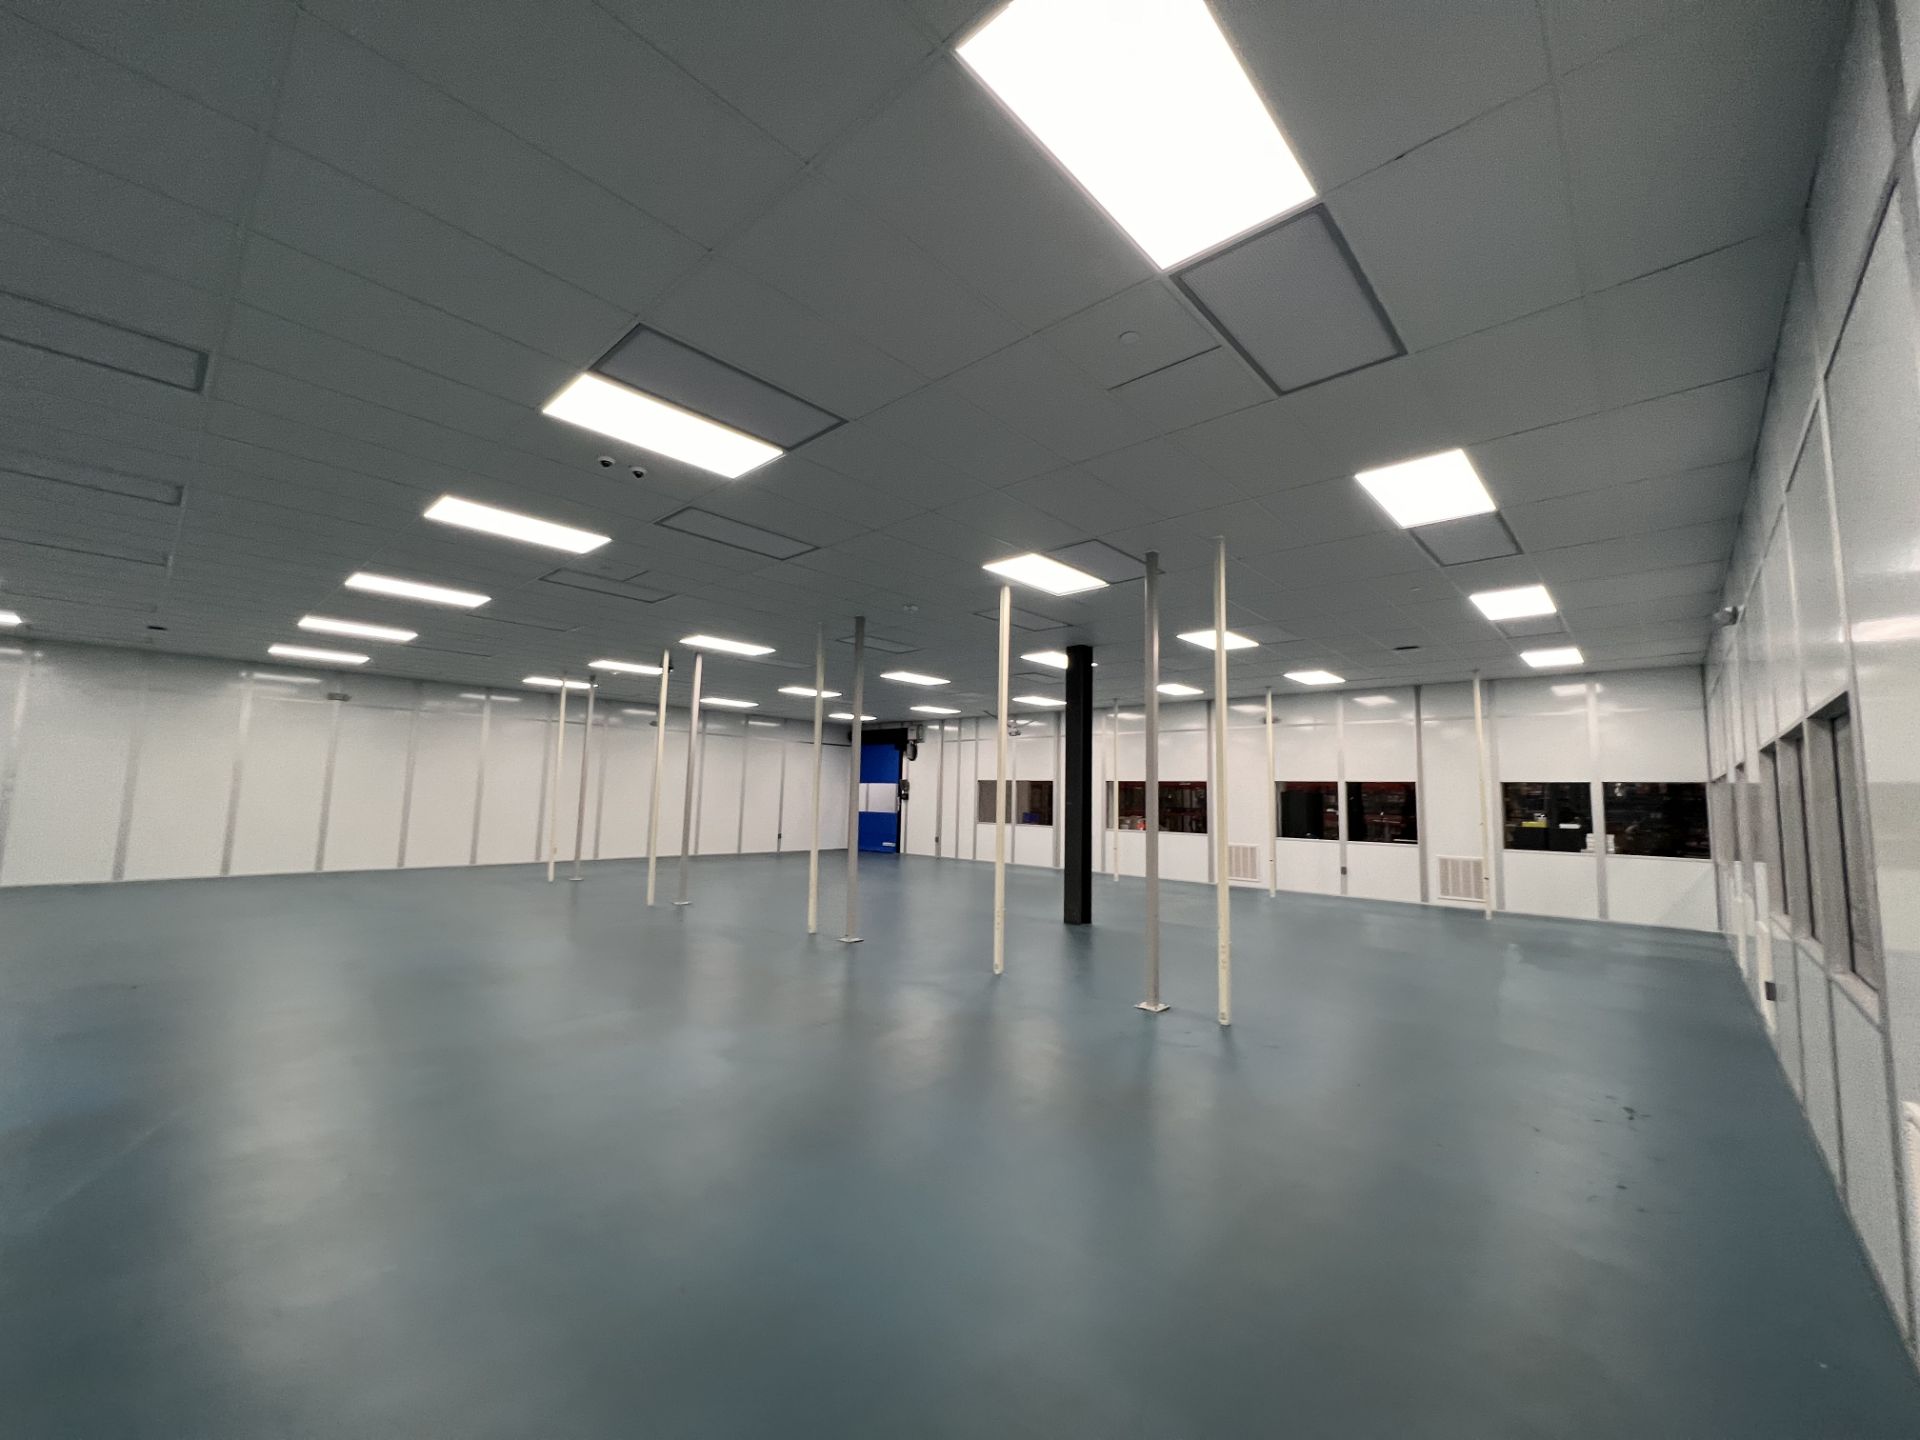 MODULAR CLEAN ROOM, APPROX. 60 FT X 60 FT X 11 FT 10 IN, INCLUDES HEPA FILTRATION UNITS - Image 19 of 34